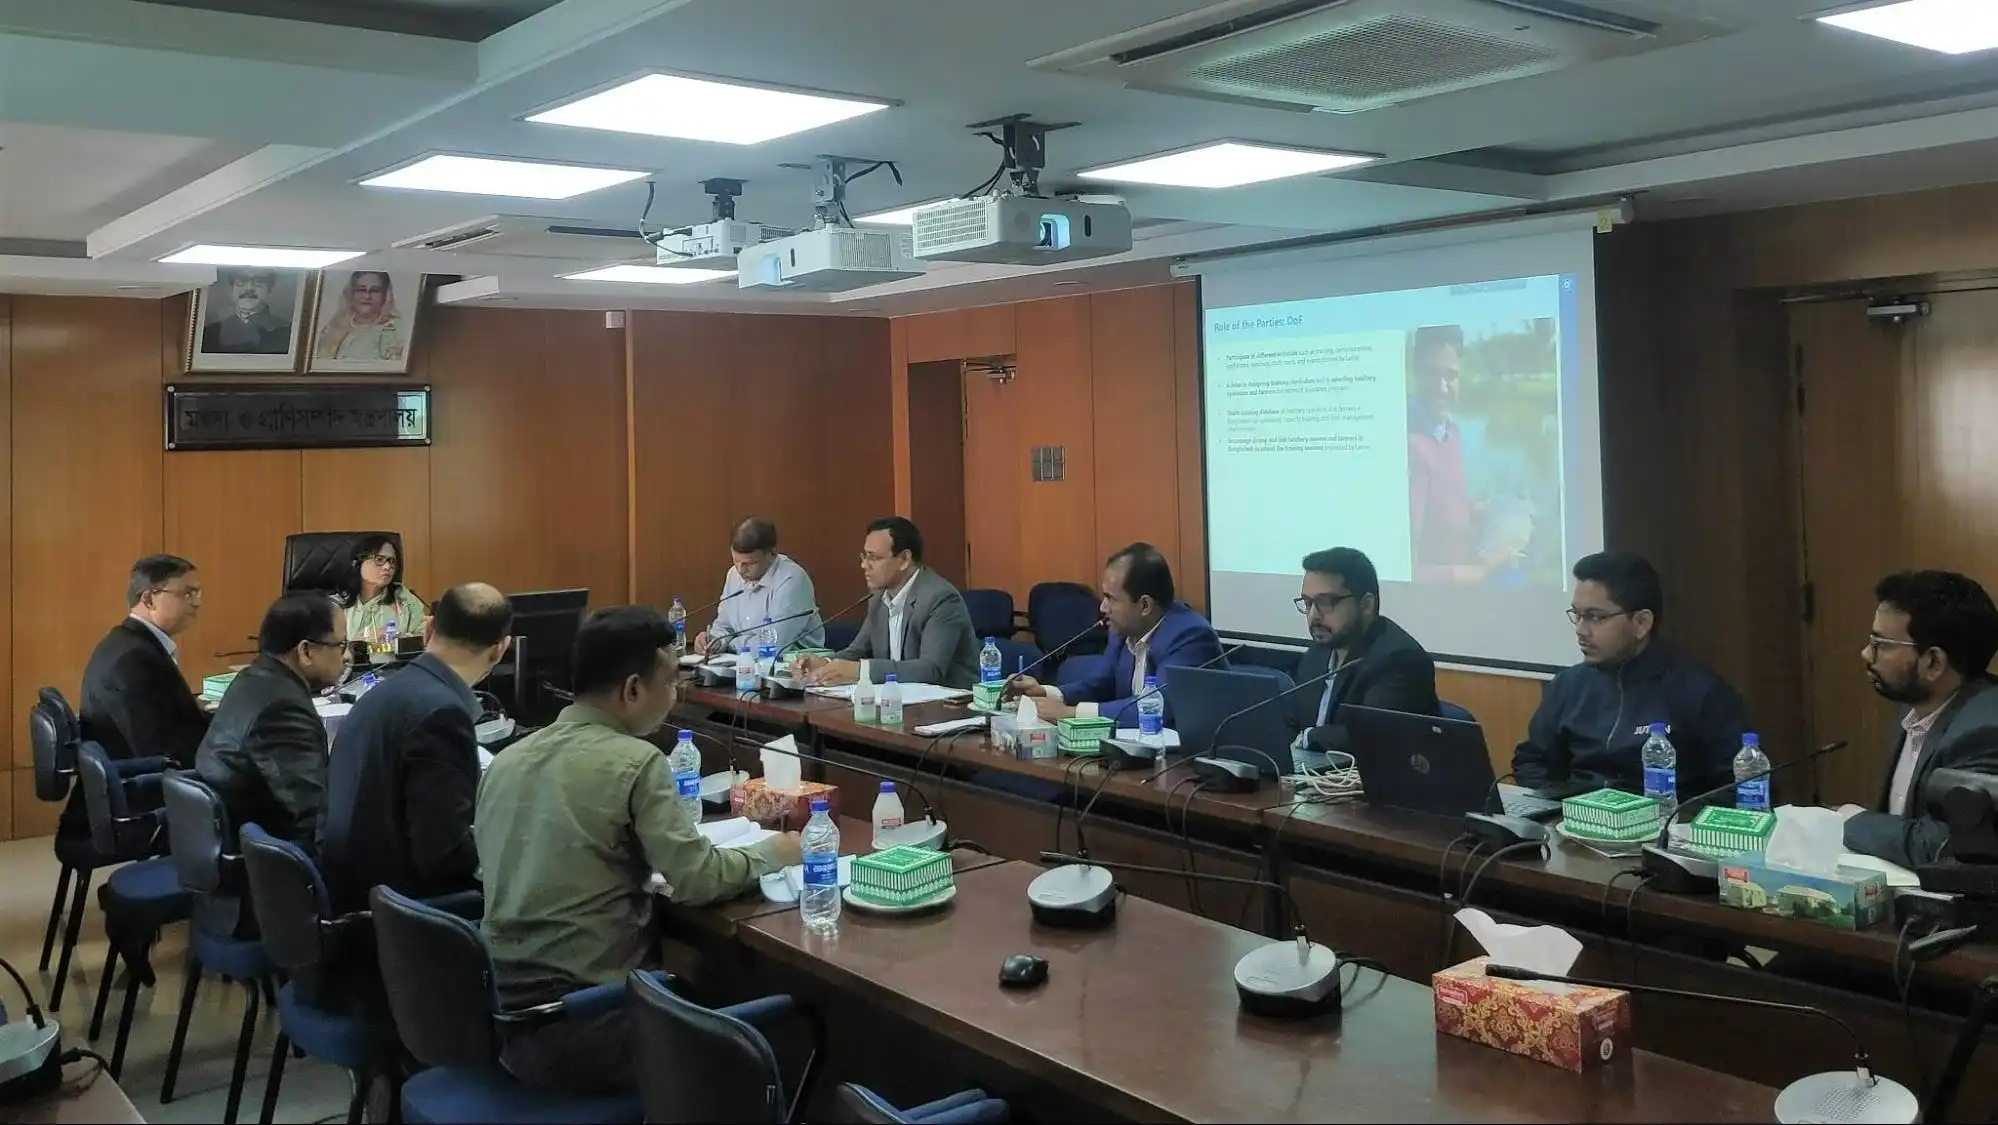 Promoting Sustainable Aquaculture Development in Bangladesh: Larive-LightCastle Discusses Scope of Collaboration with the Officials of the Ministry of Fisheries and Livestock for FoodTechBangladesh